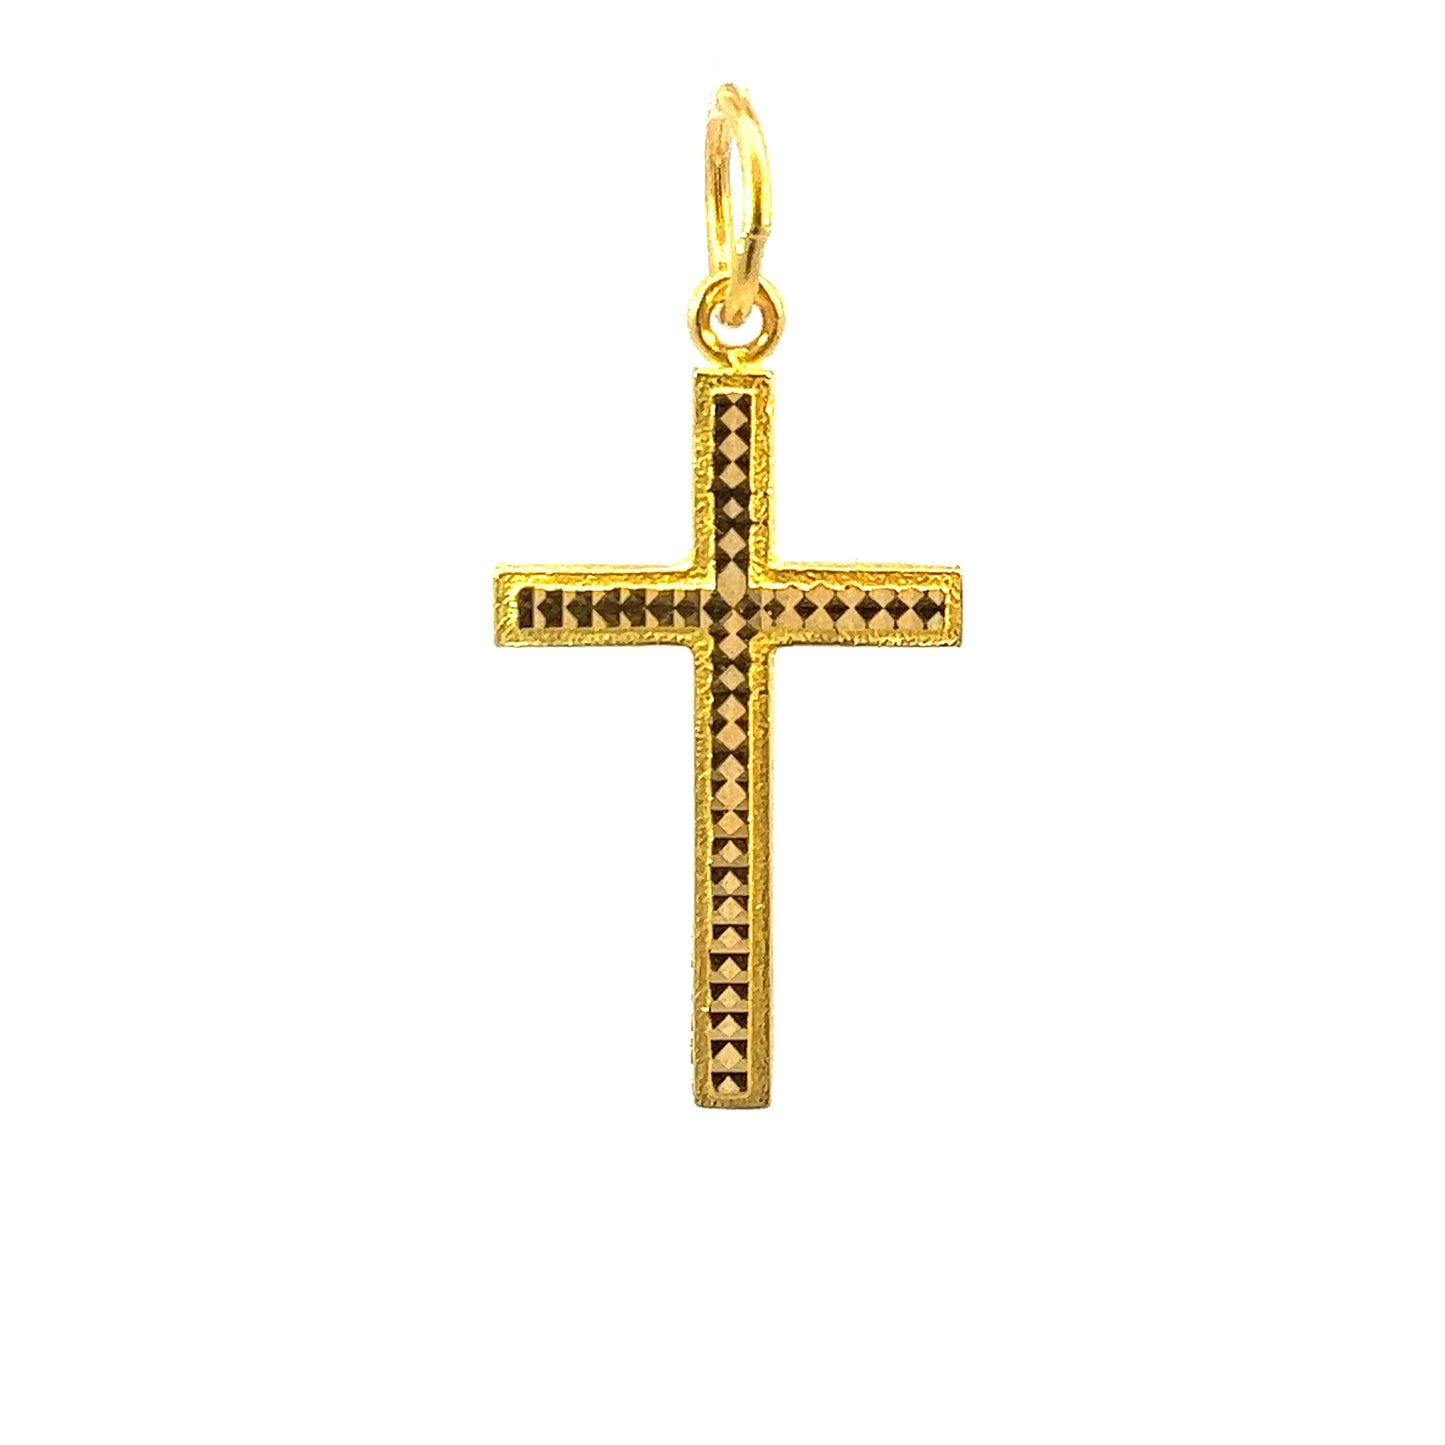 GOLD PENDANT ( 22K ) ( 2.06g ) - 0004445 Chain sold separately